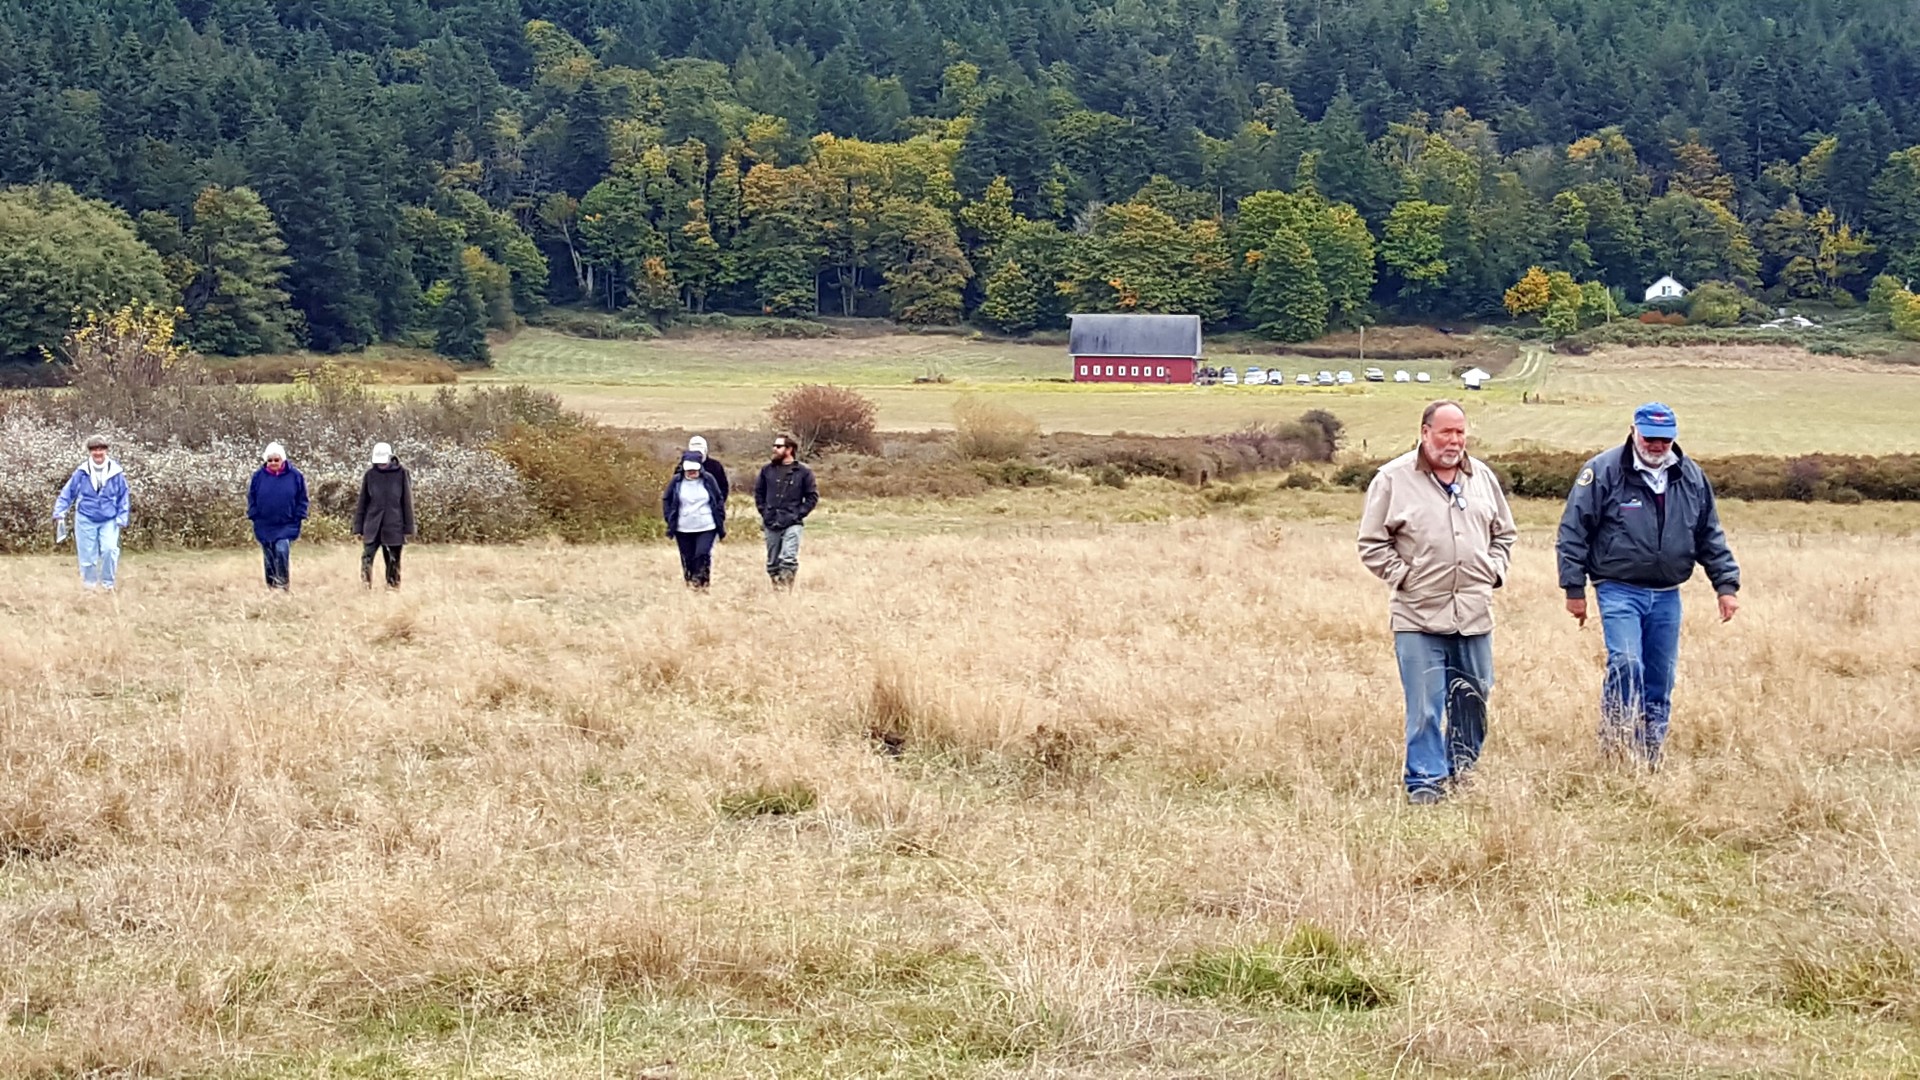 Community members tour Guemes Valley property, October 2017. Photograph credit: Skagit Land Trust staff.